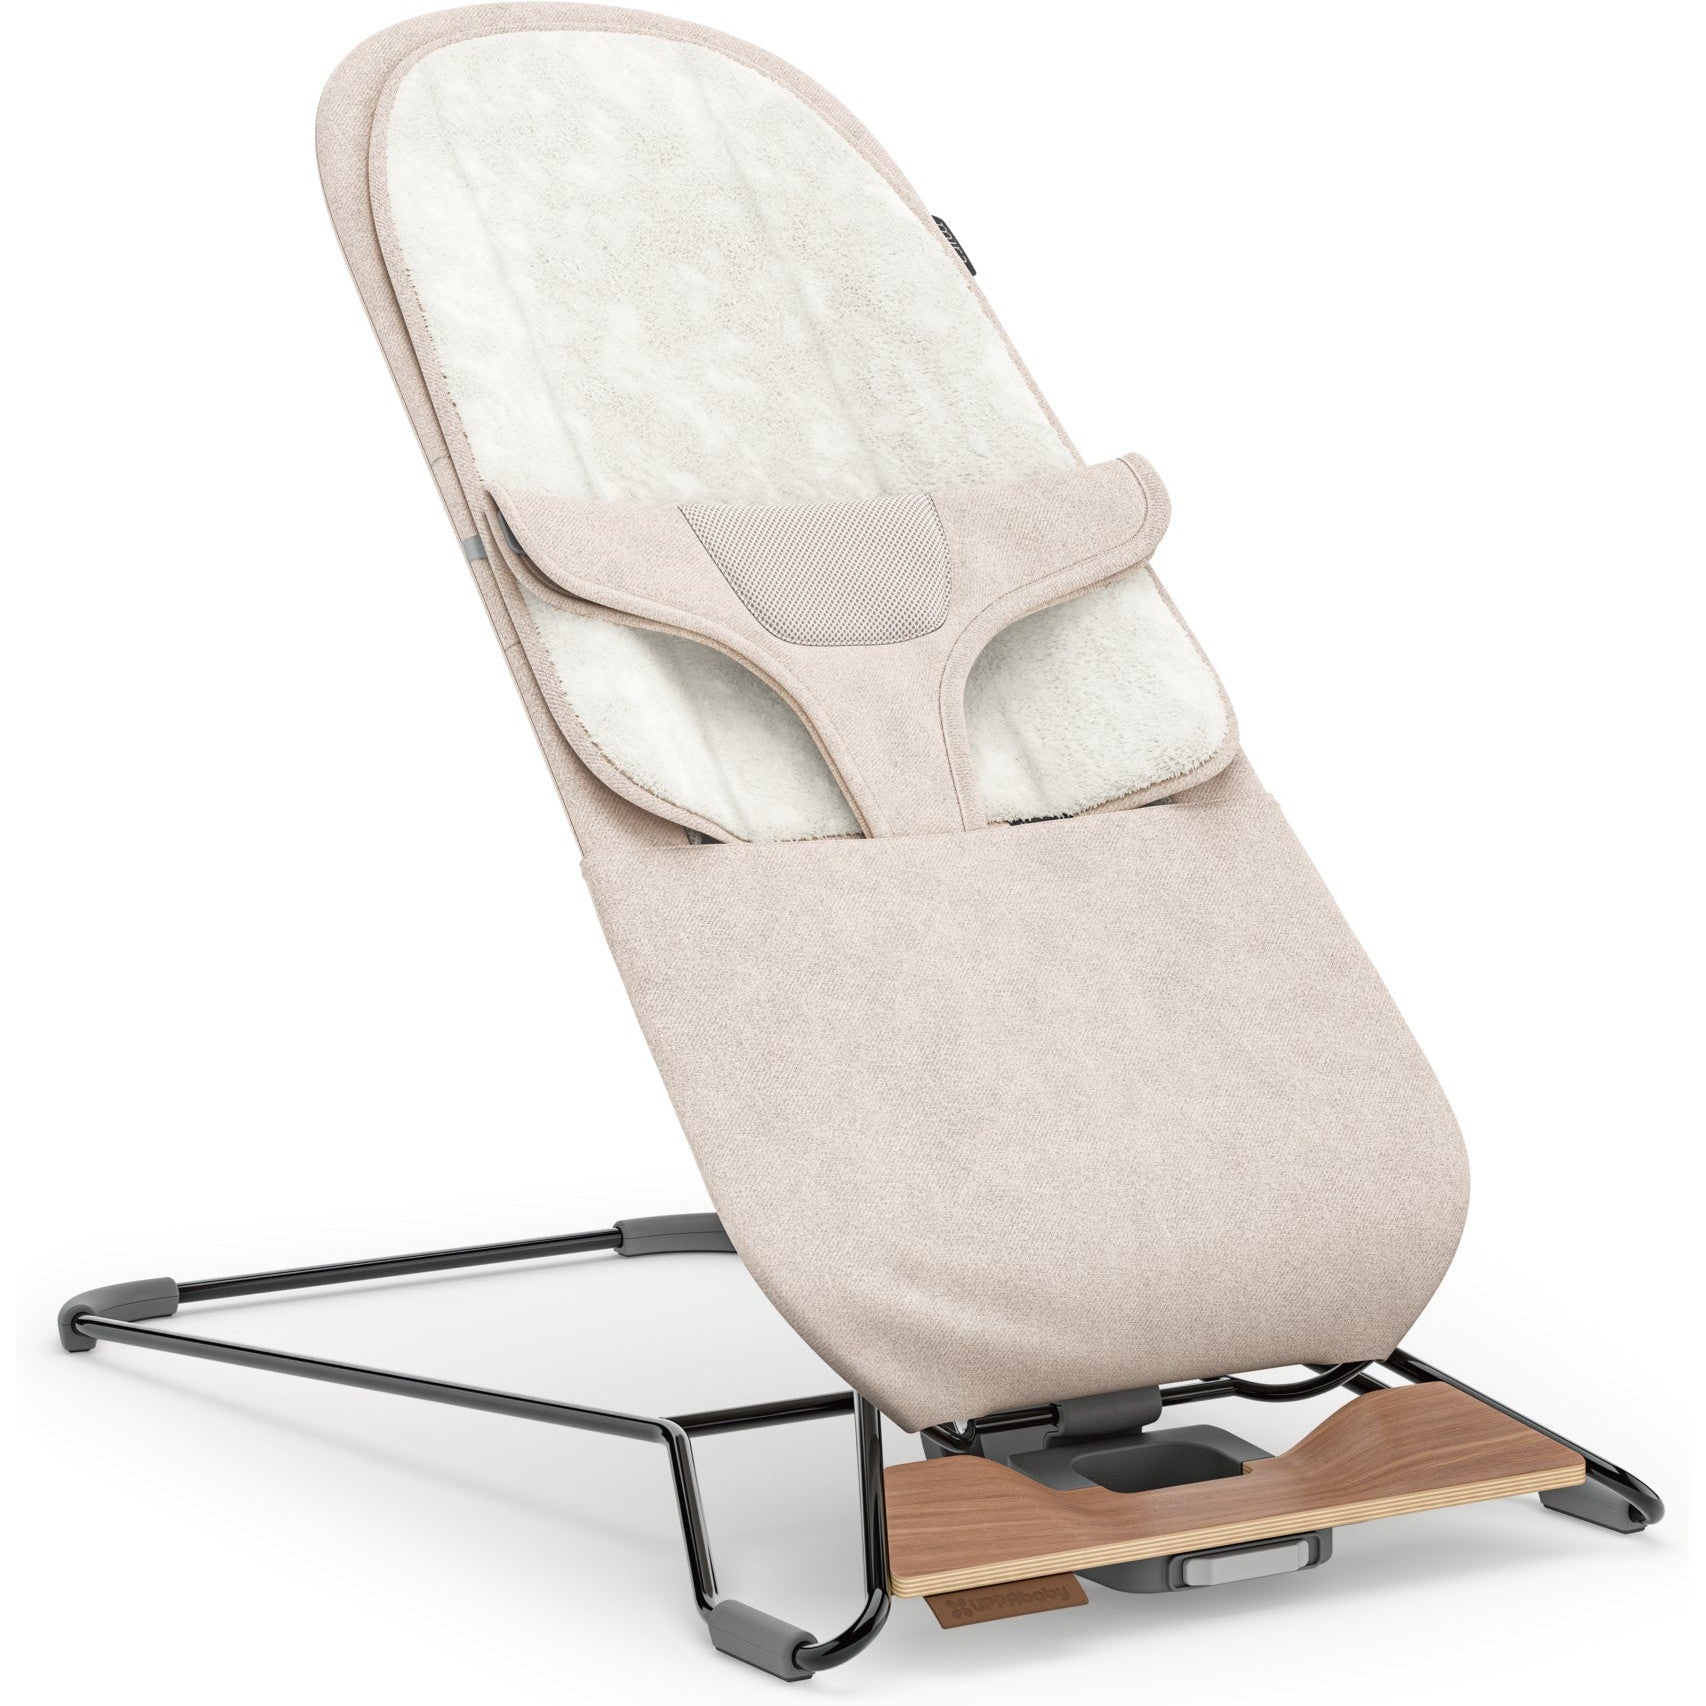 UPPAbaby Mira 2-in-1 Bouncer & Seat - Twinkle Twinkle Little One